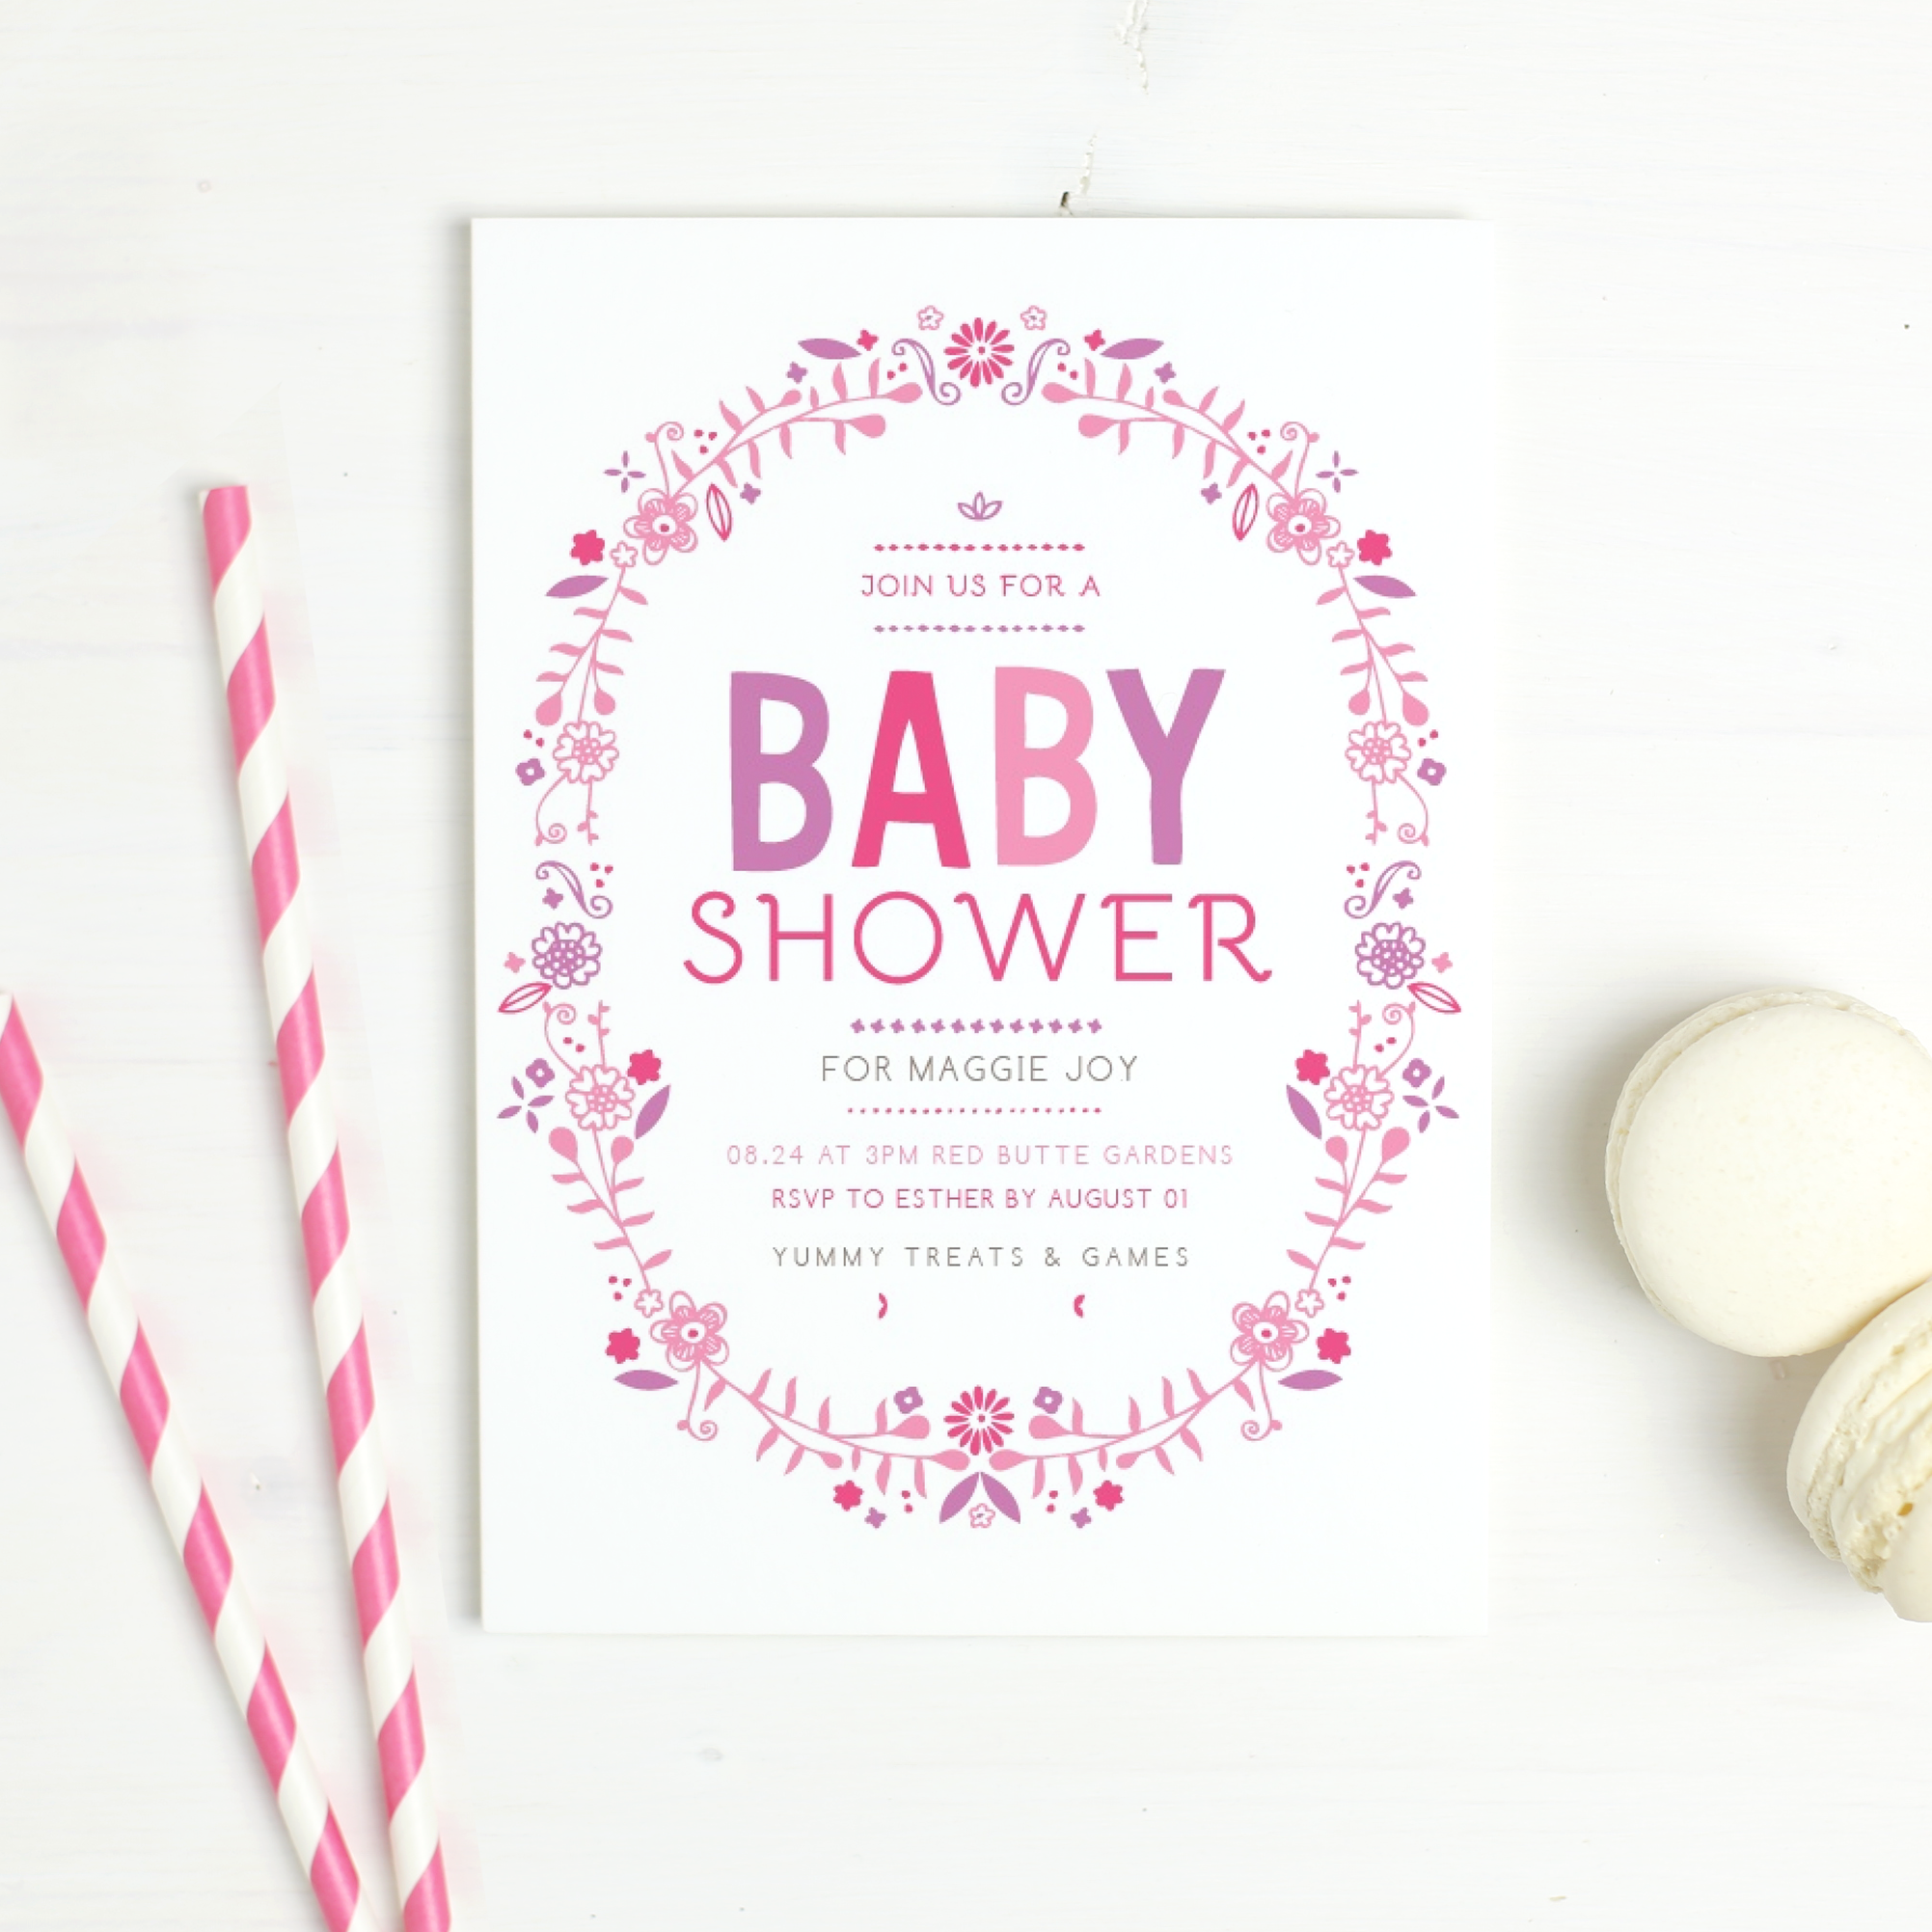 Fun Baby Shower Invitation Ideas from Basic Invite (Plus Free Printables) —  Phil and Mama